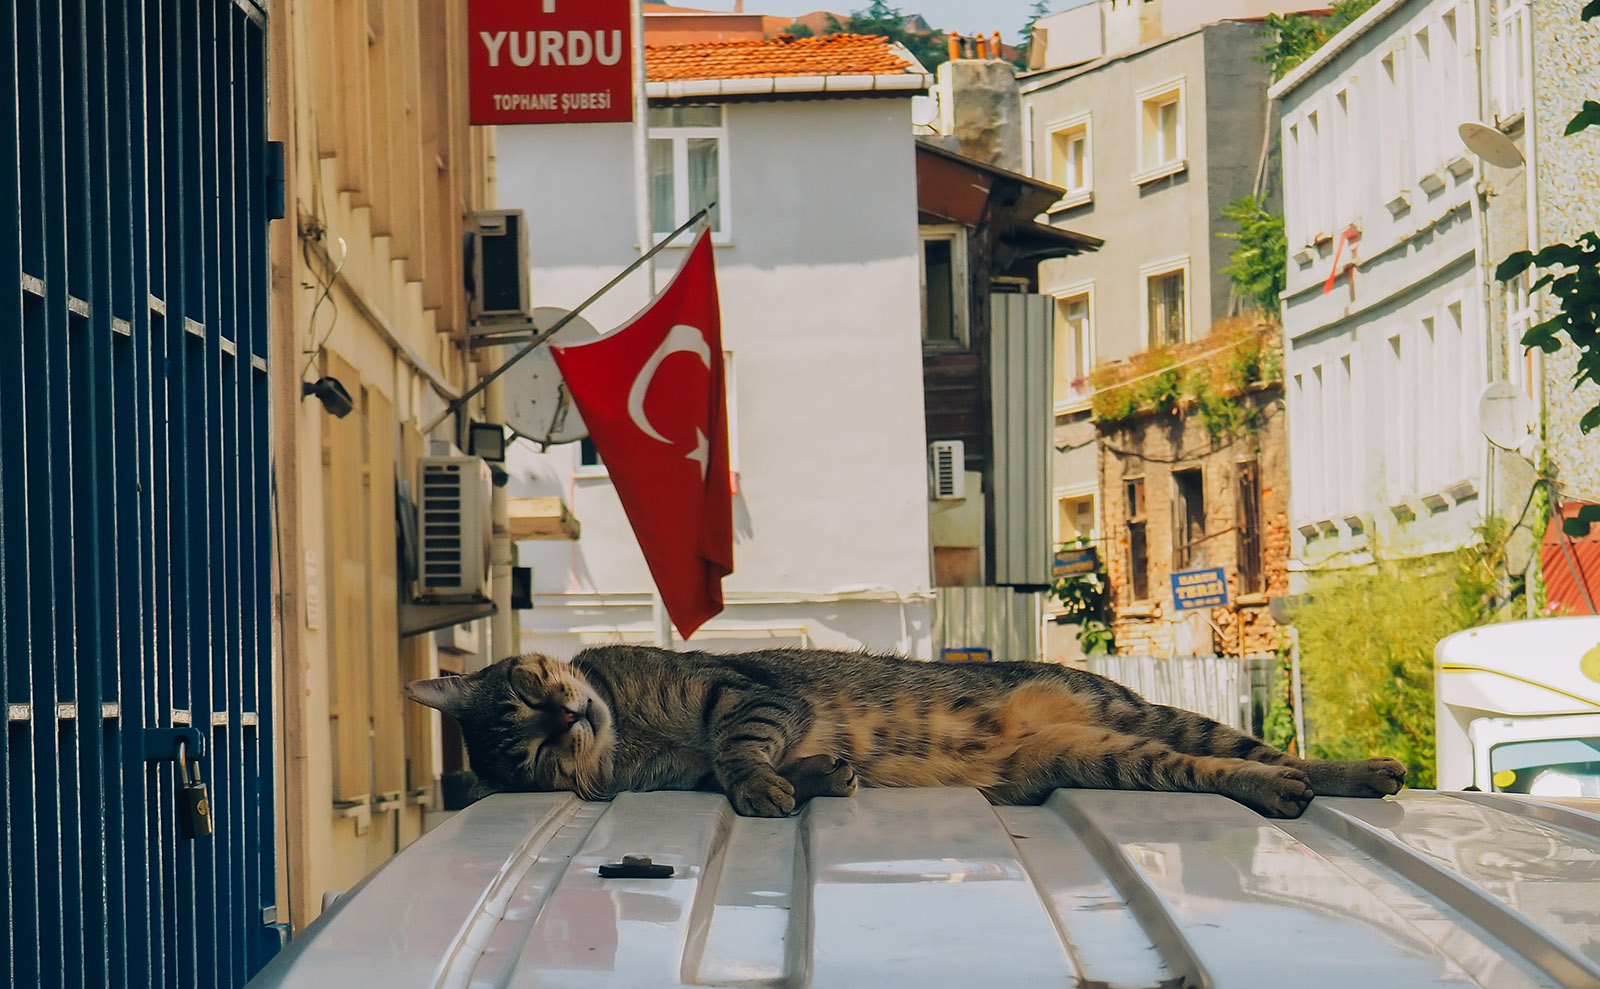 tortoise-shell cat sleeping on top of car under the turkish flag on a sunny street in istanbul